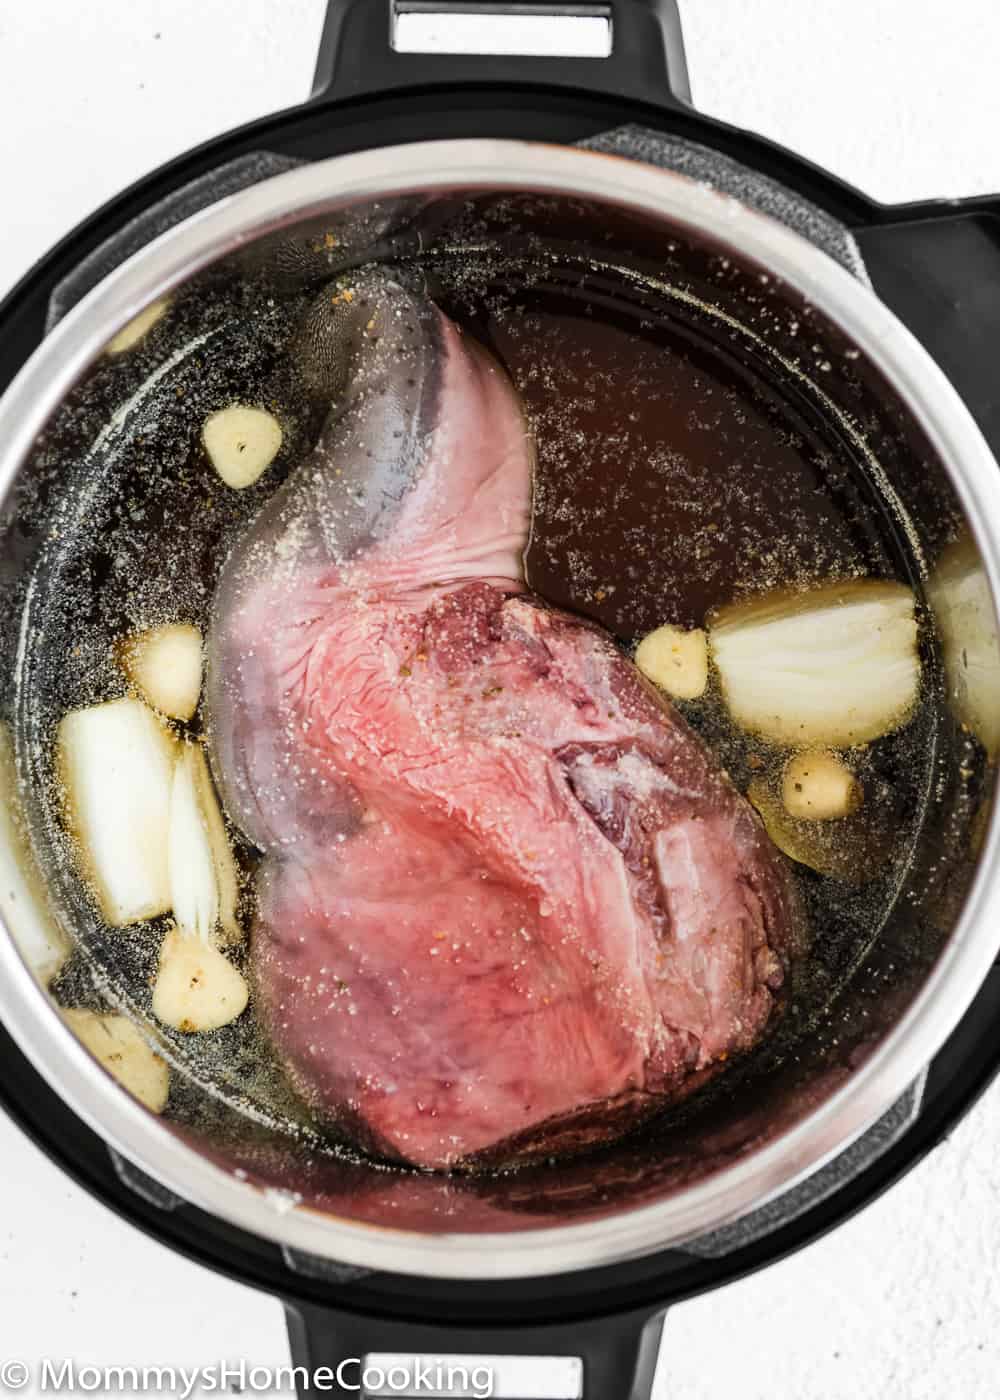 uncooked beef tongue in a pressure cooker with onion, garlic and bay leaf